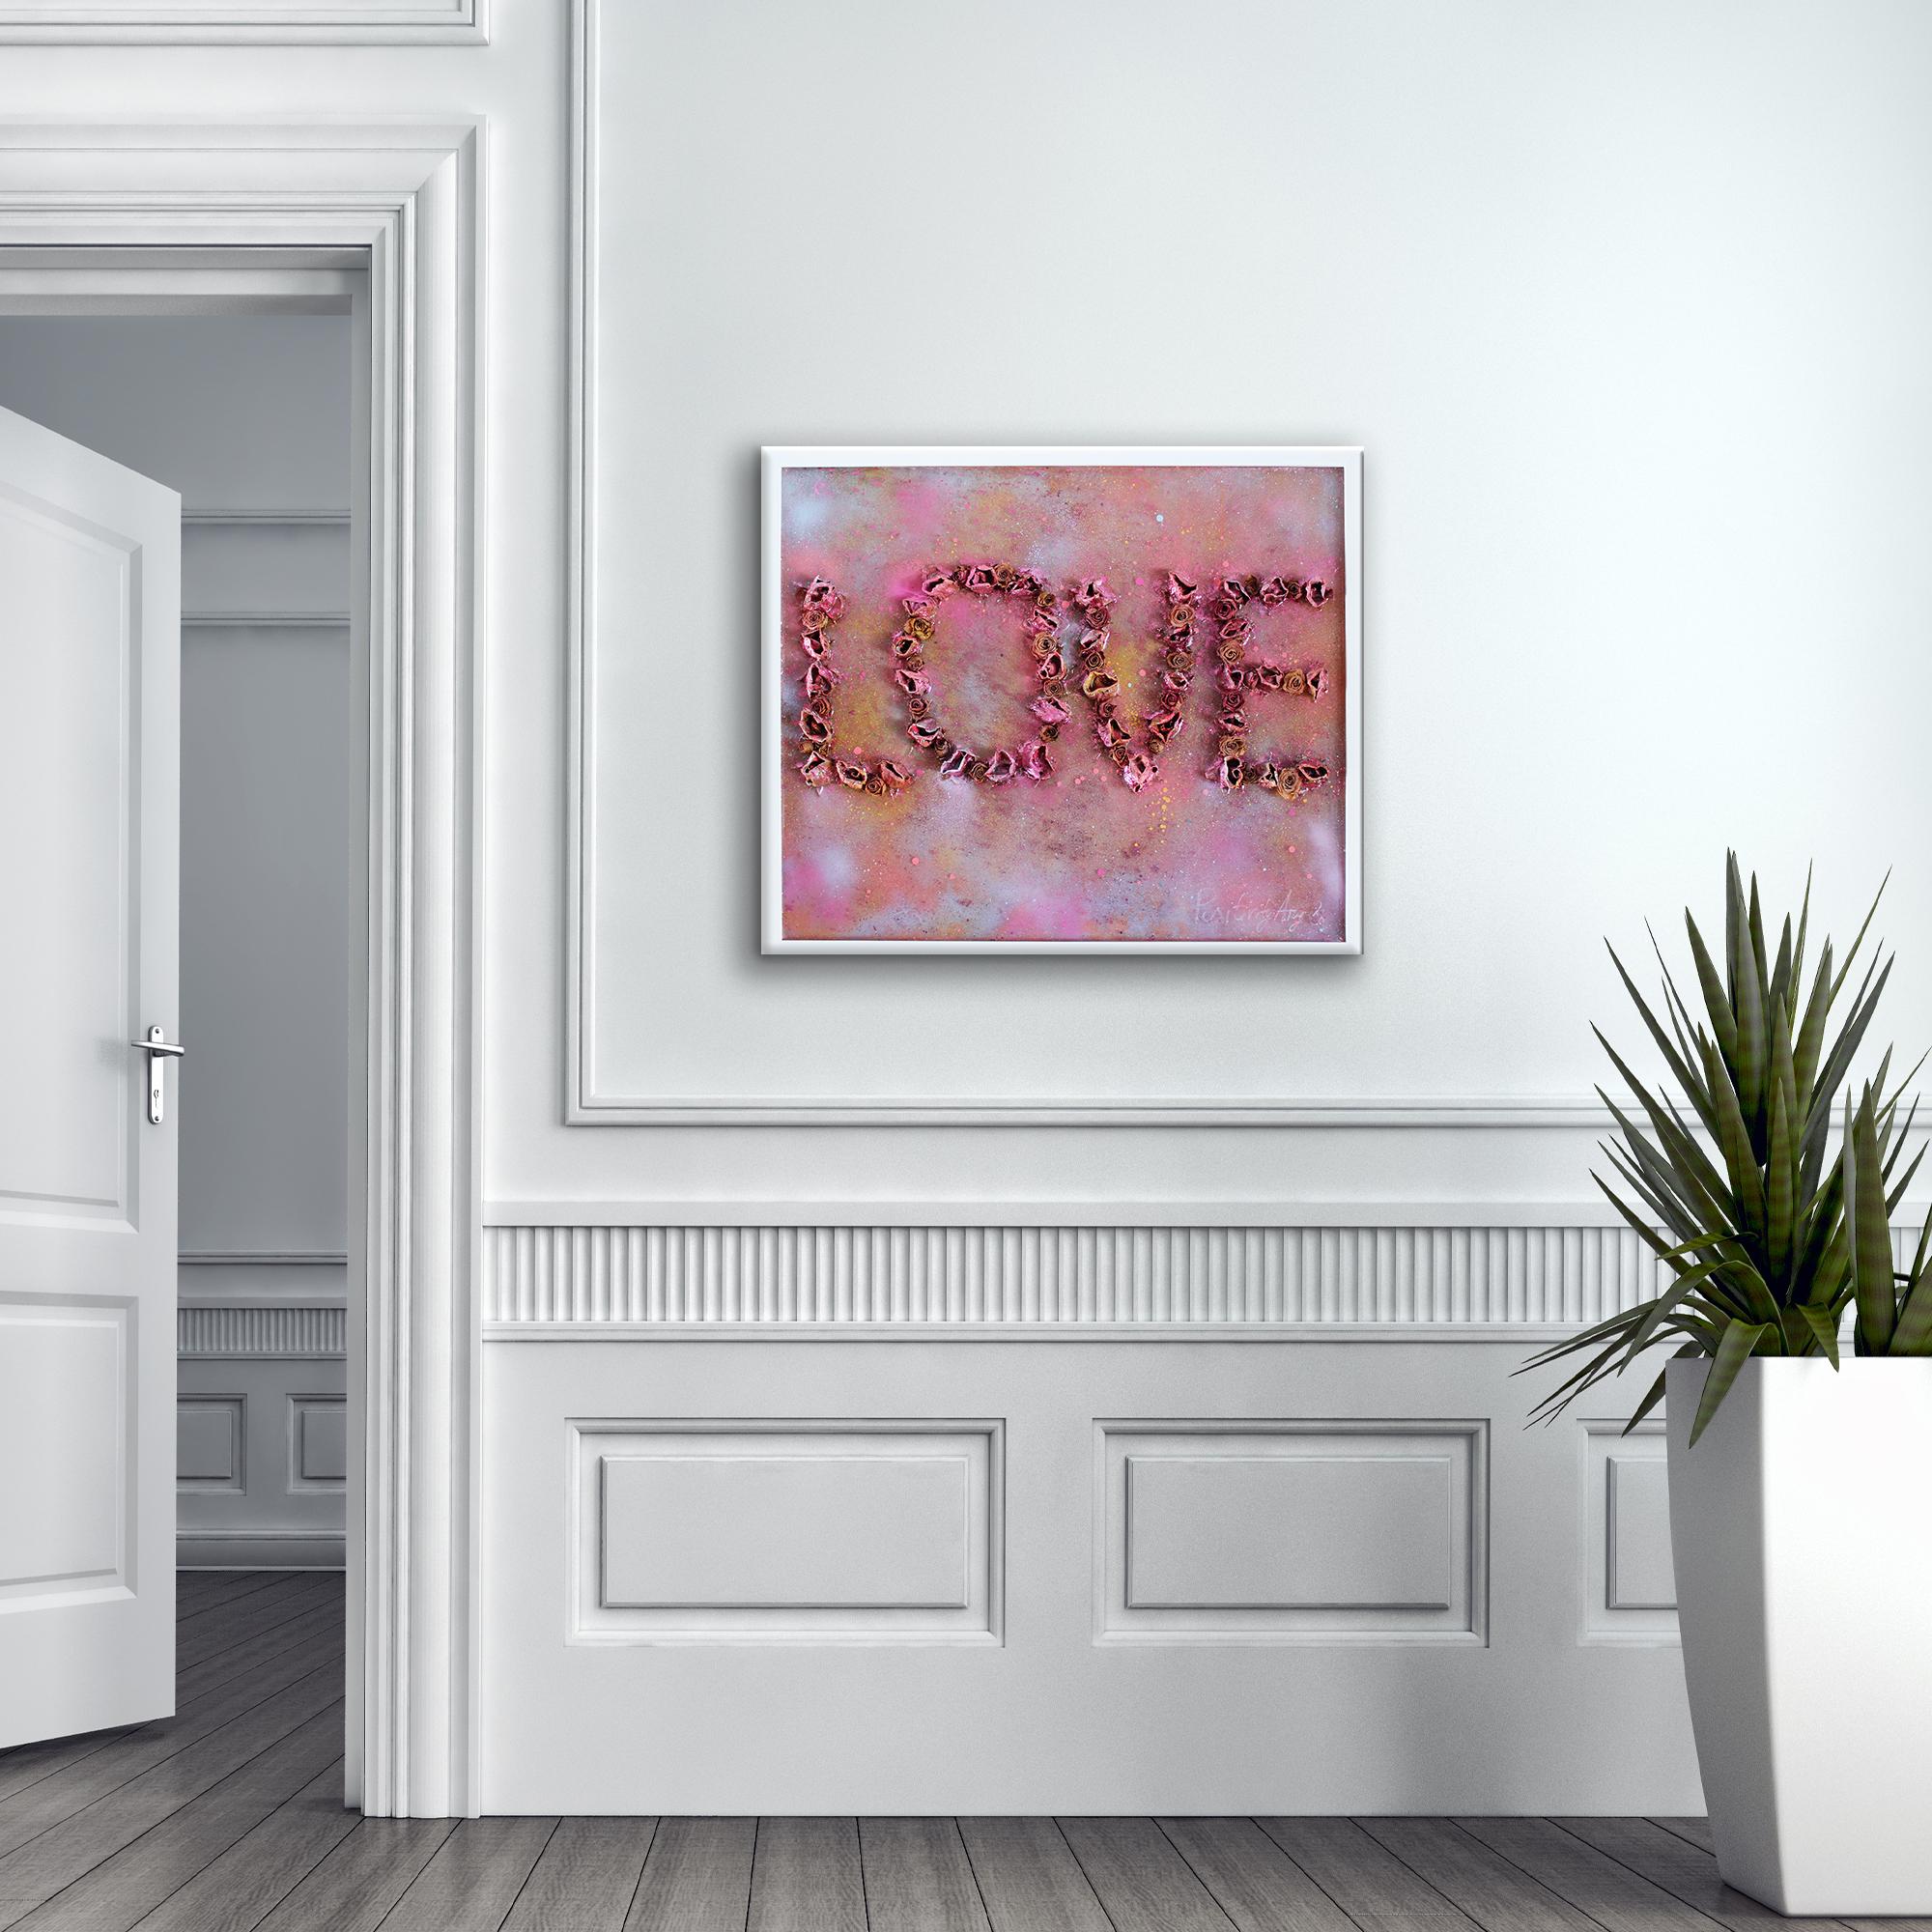 'Love 1.3' Framed Board Original Pop Art features dried rosebuds forming the word 